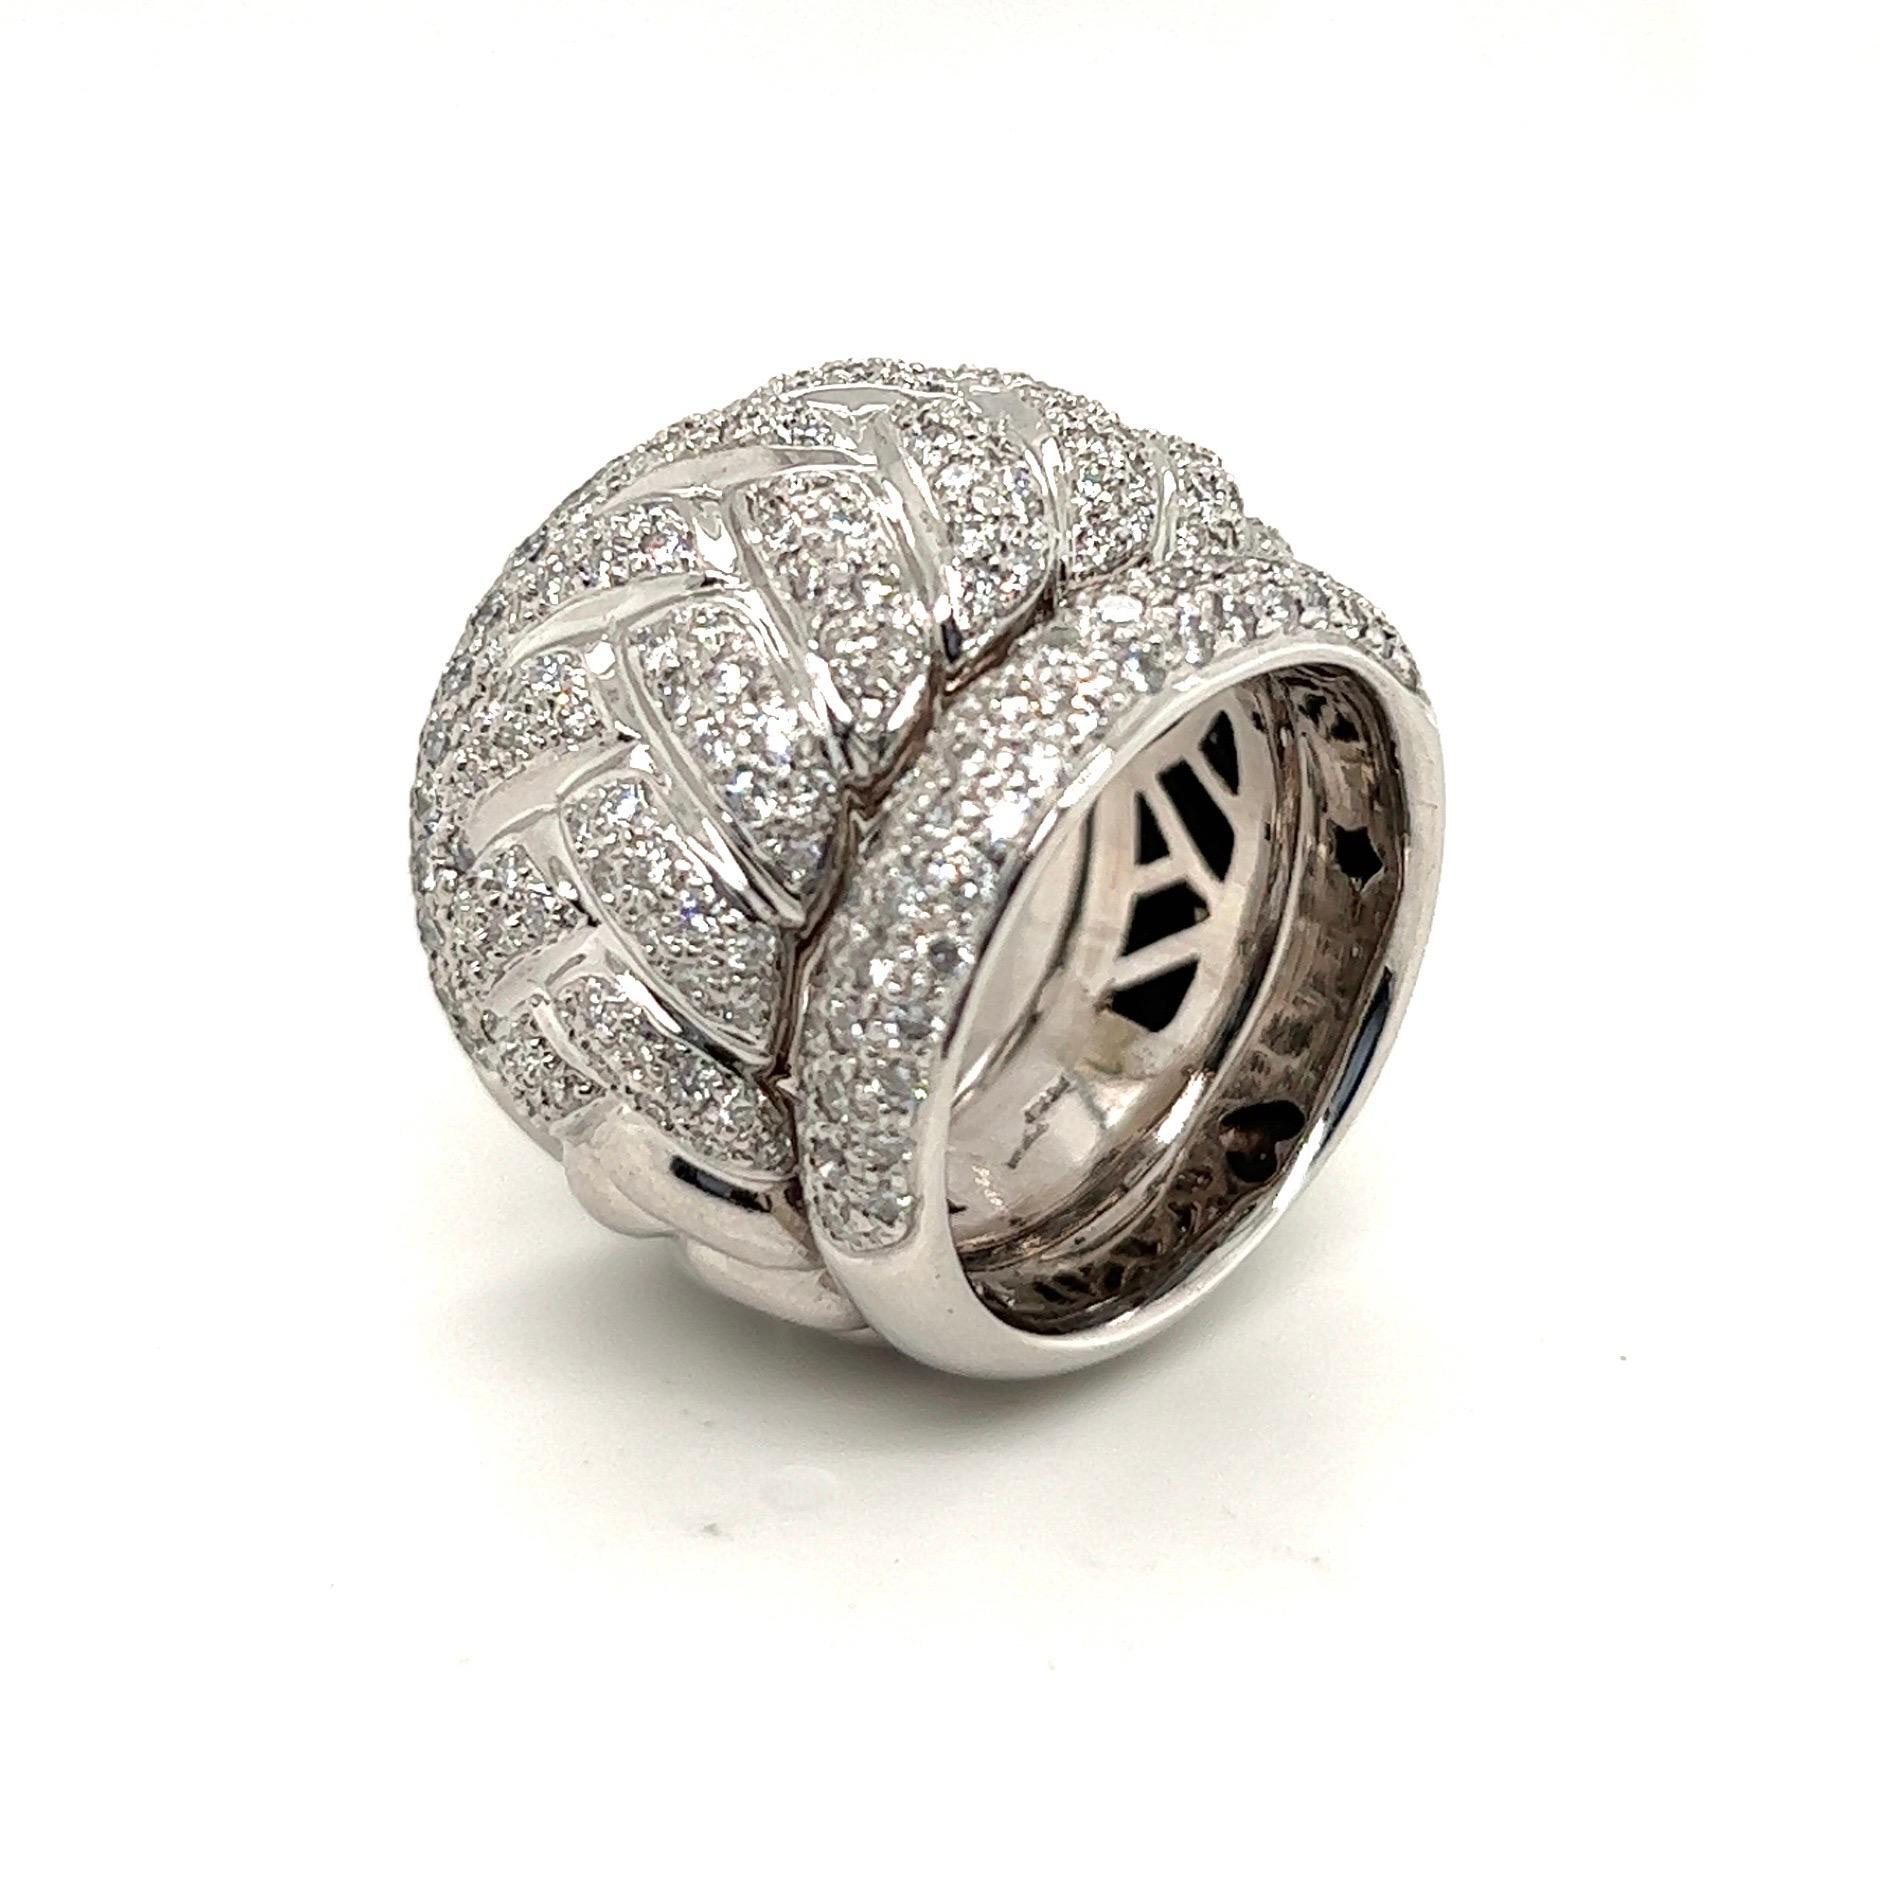 Attractive 18 karat white gold and diamond cocktail ring.

Entirely crafted in 18 karat white gold and designed as a bold wide band ring featuring a braided pattern. The front side of the ring is pavé-set with numerous brilliant-cut diamonds